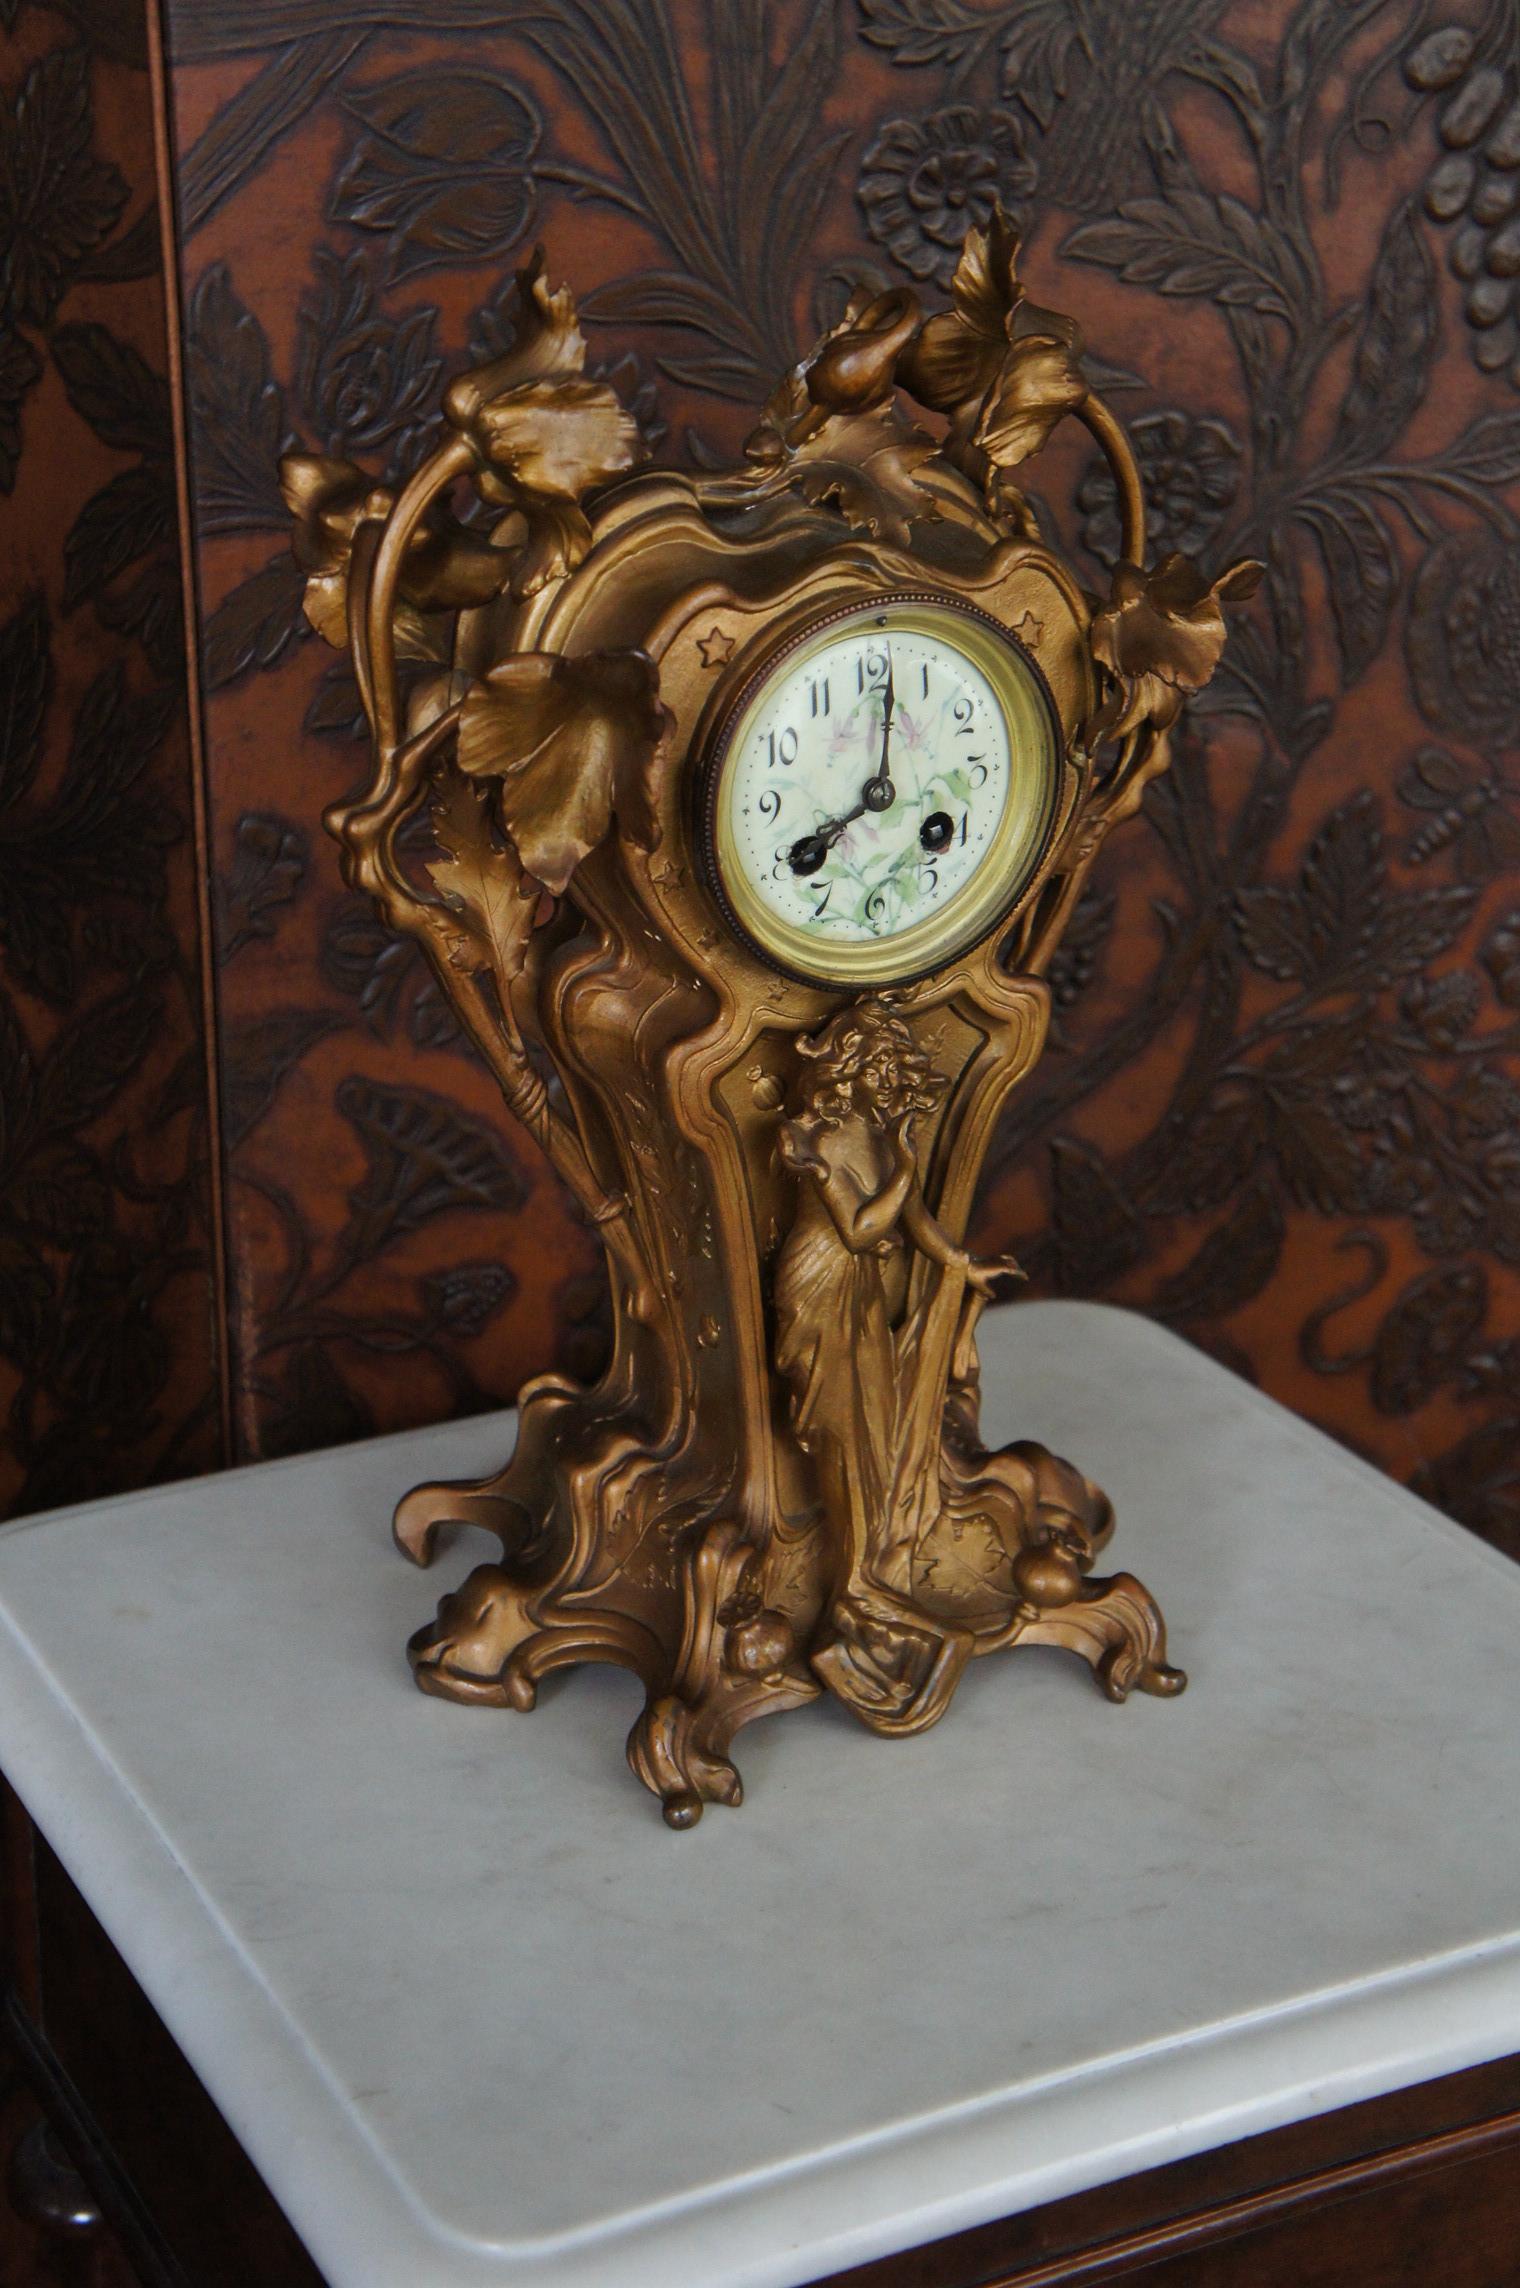 Stunning Early 20th Century Golden Color Art Nouveau Table or Mantel Clock 13